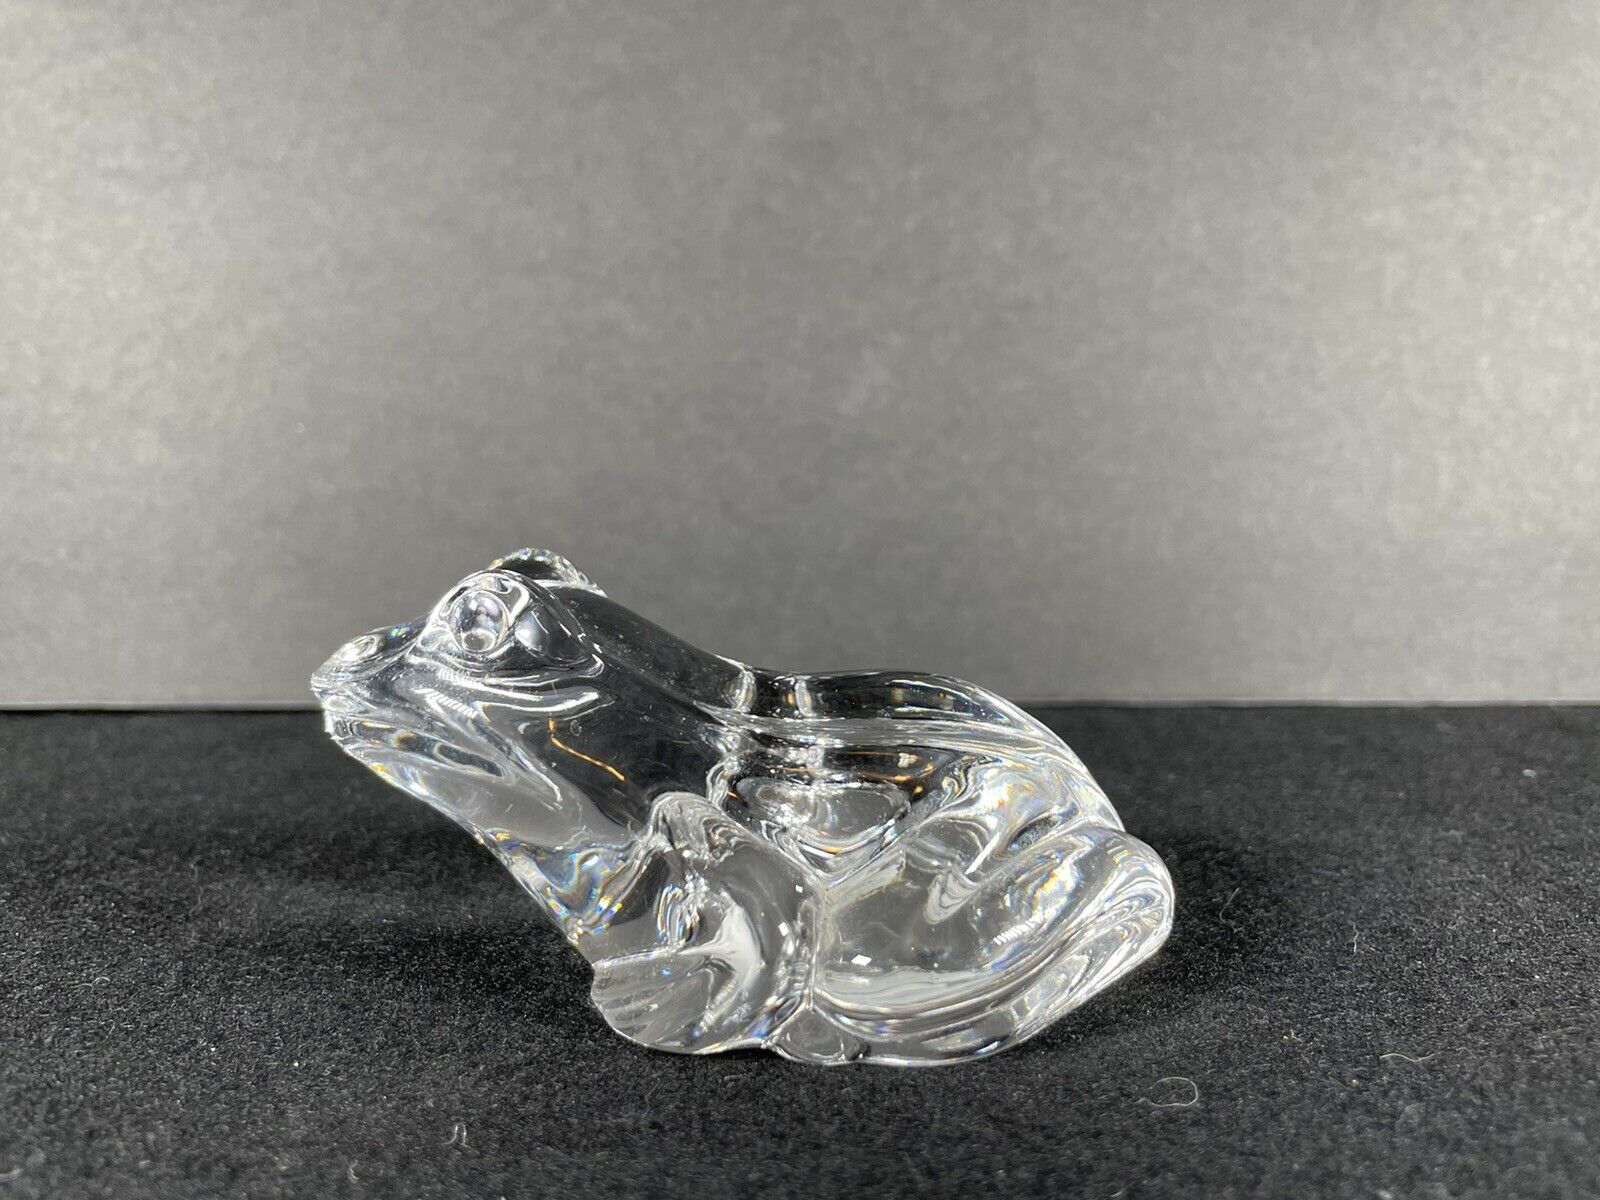 PRINCESS HOUSE 24% LEAD CRYSTAL GLASS FROG FIGURINE PAPERWEIGHT GERMANY (W2-1)